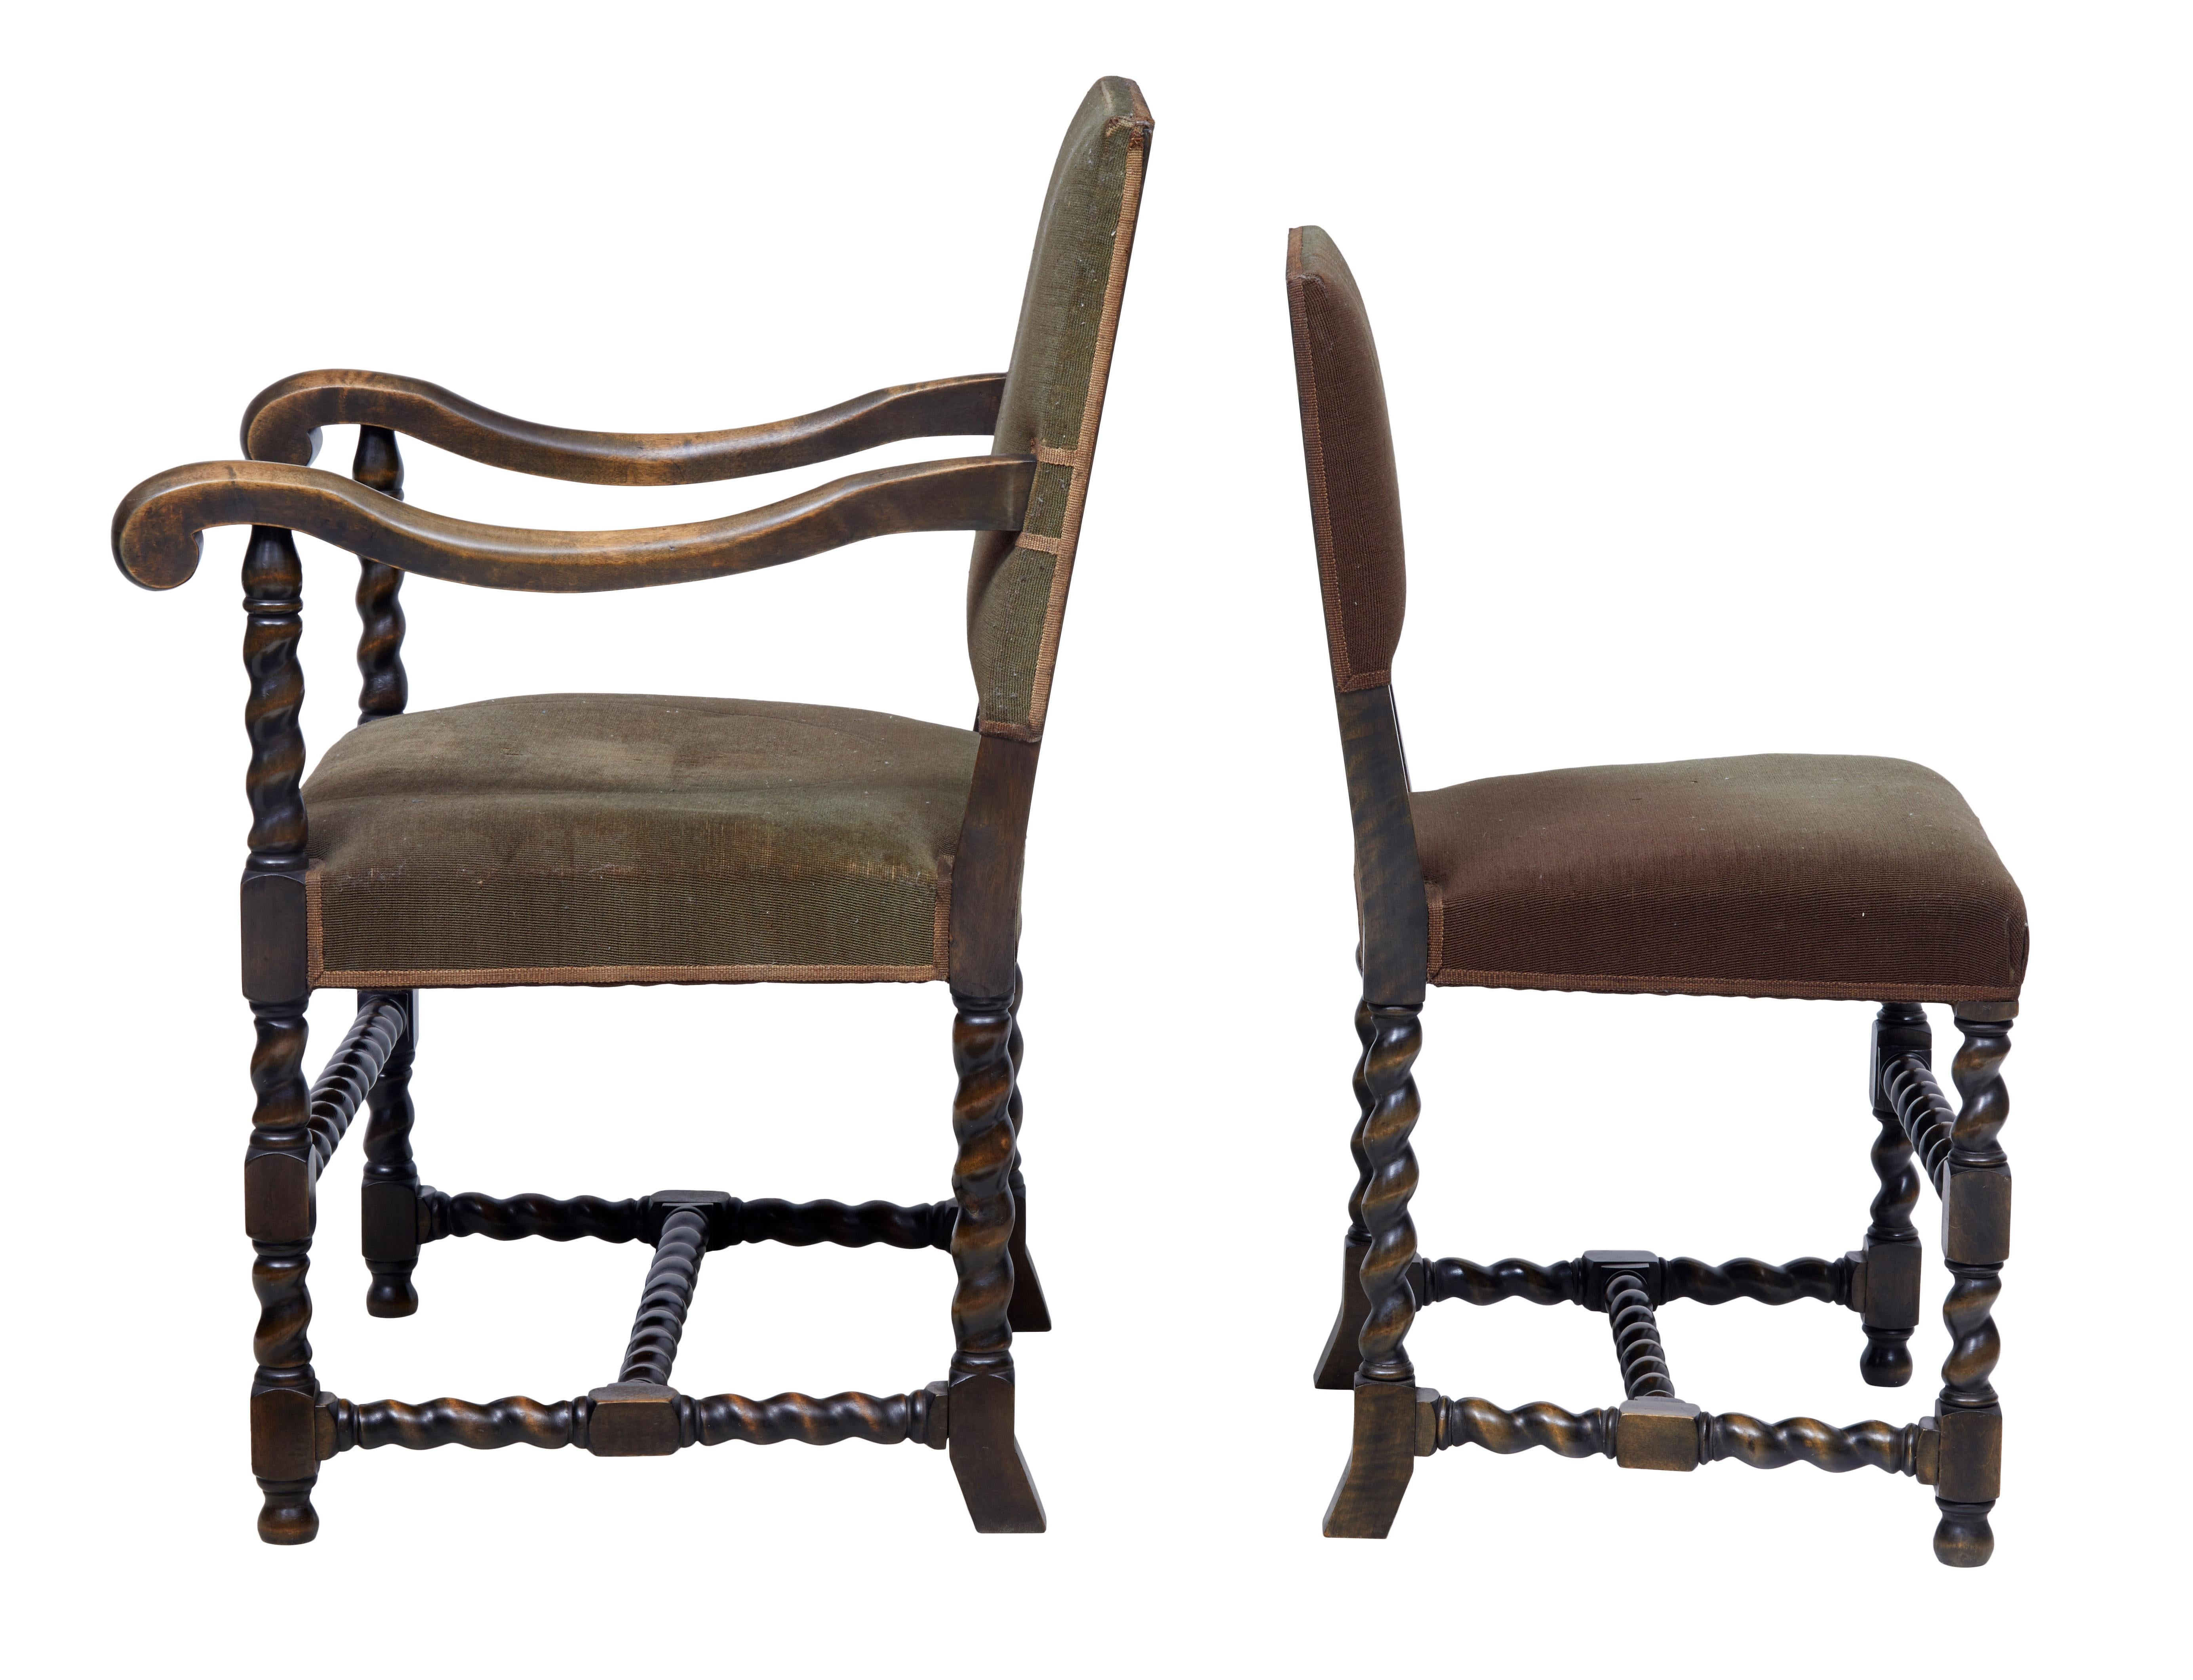 Here we have a single and armchair by Otto Schulz, circa 1940.

Made in birch which has been stained. Scrolled shaped arms with barley twist supports. Each standing on barley twist legs and stretchers.

Ideal for use around a freestanding